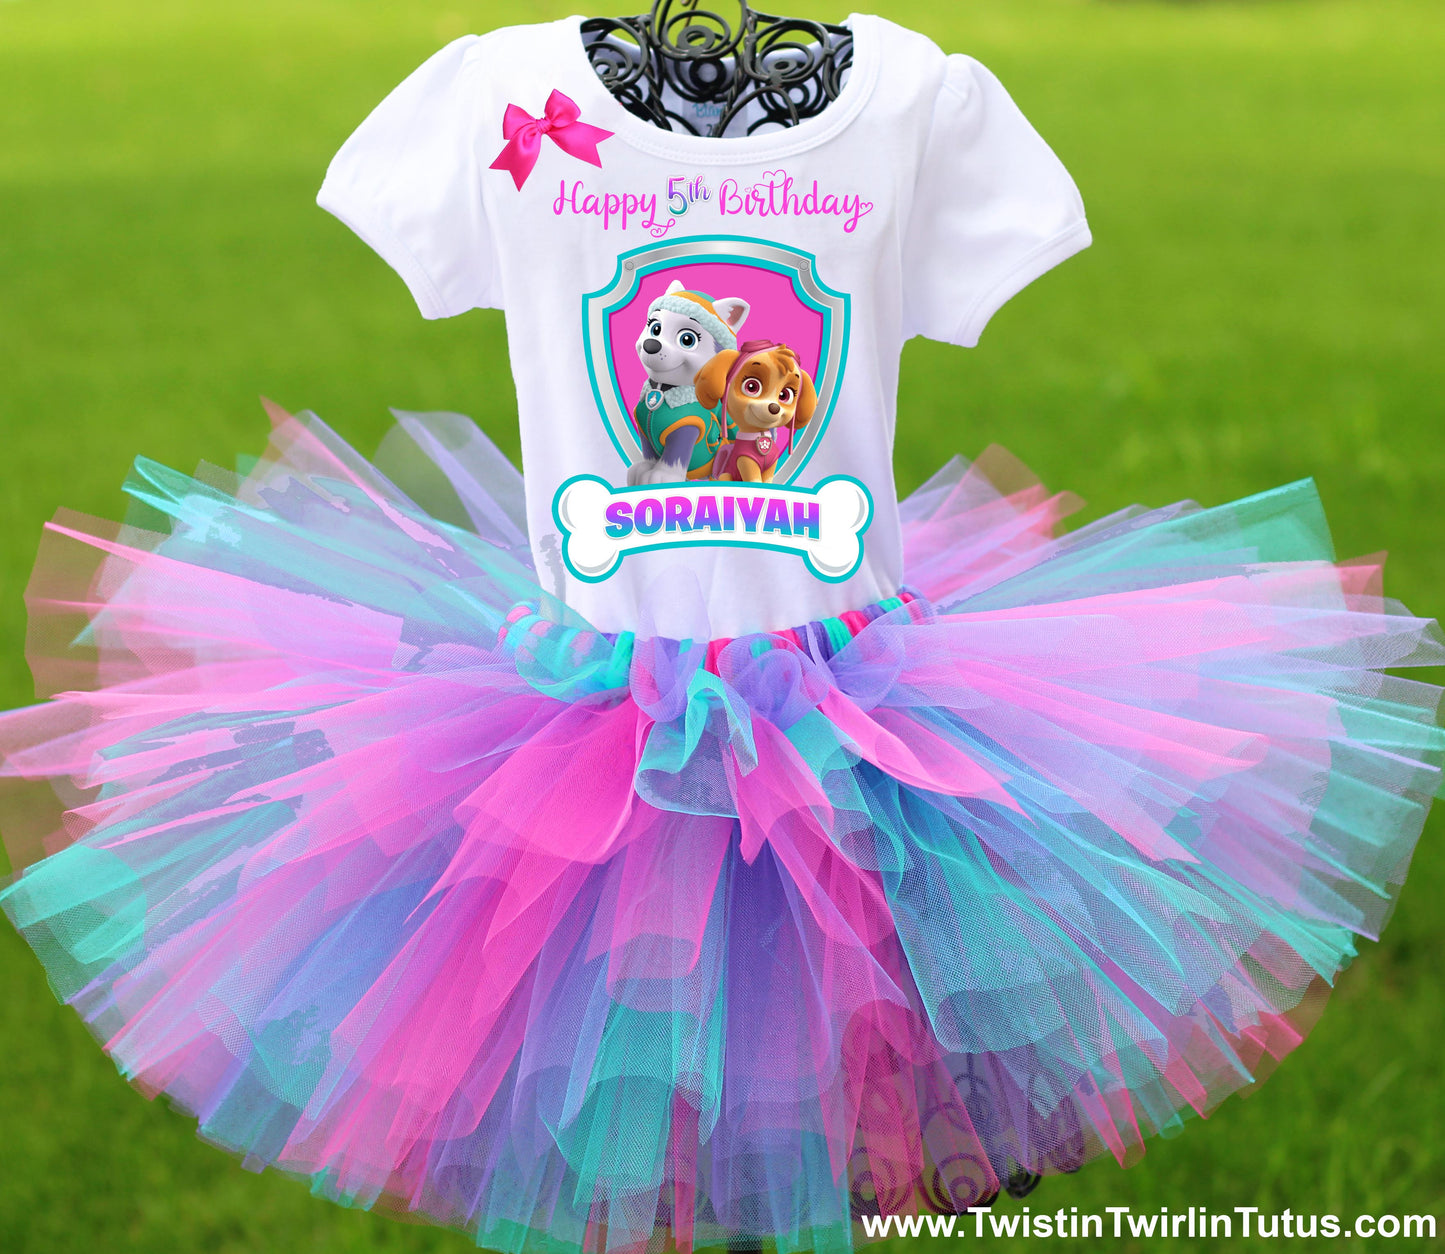 Paw Patrol Skye and Everest Birthday Tutu Outfit